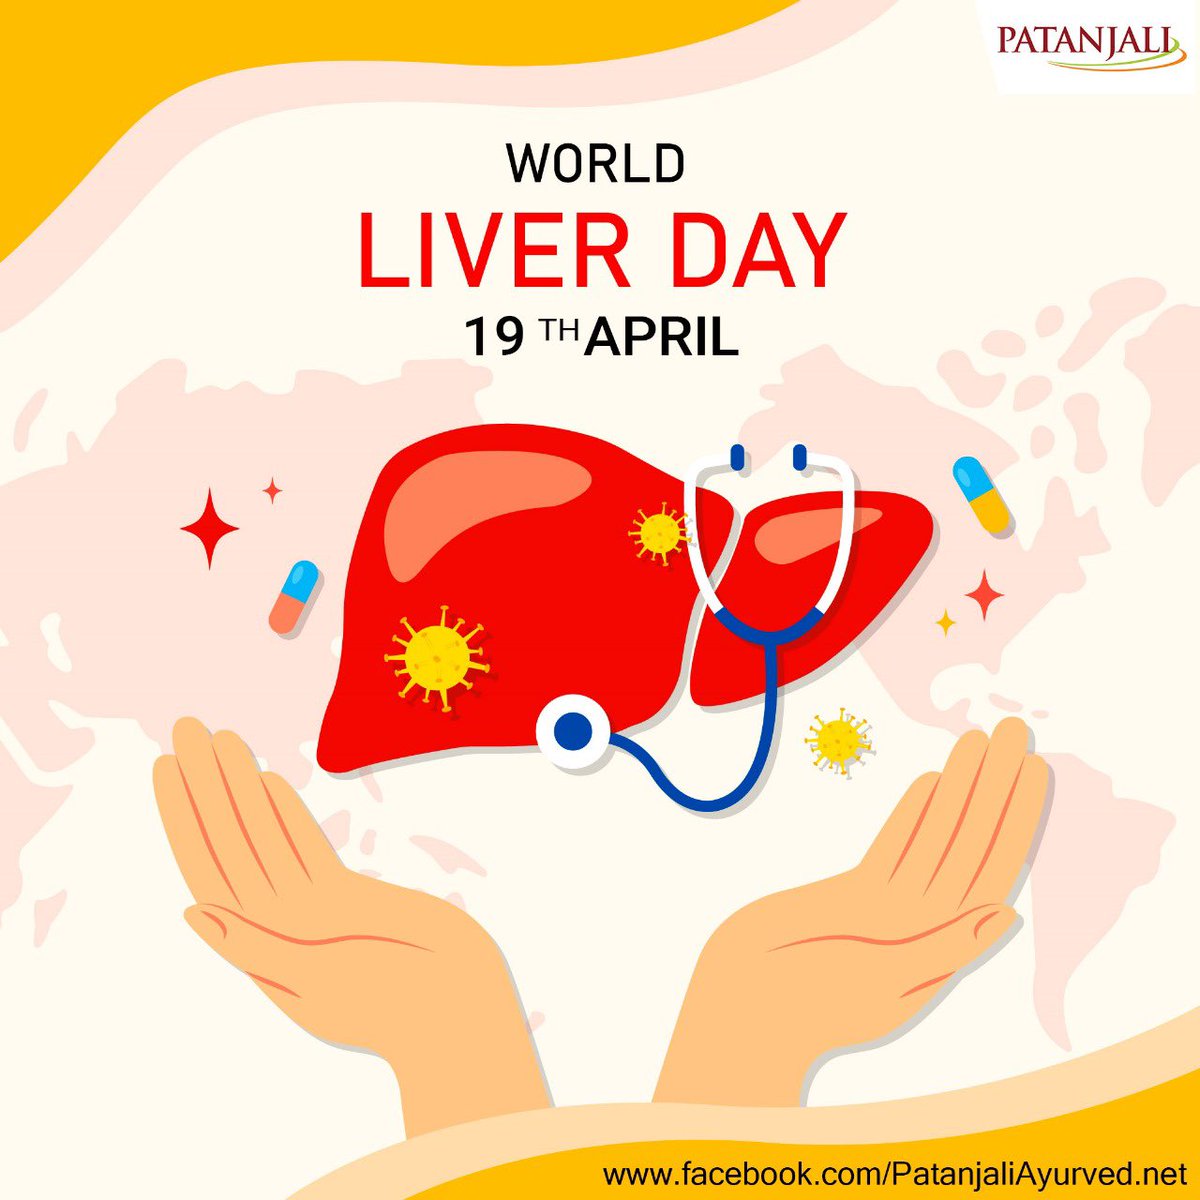 On World Liver Day, let's pledge to spread awareness about liver-related disease. Happy World Liver Day! #WorldLiverDay2024 #PatanjaliAyurved​​ #WorldLiverDay